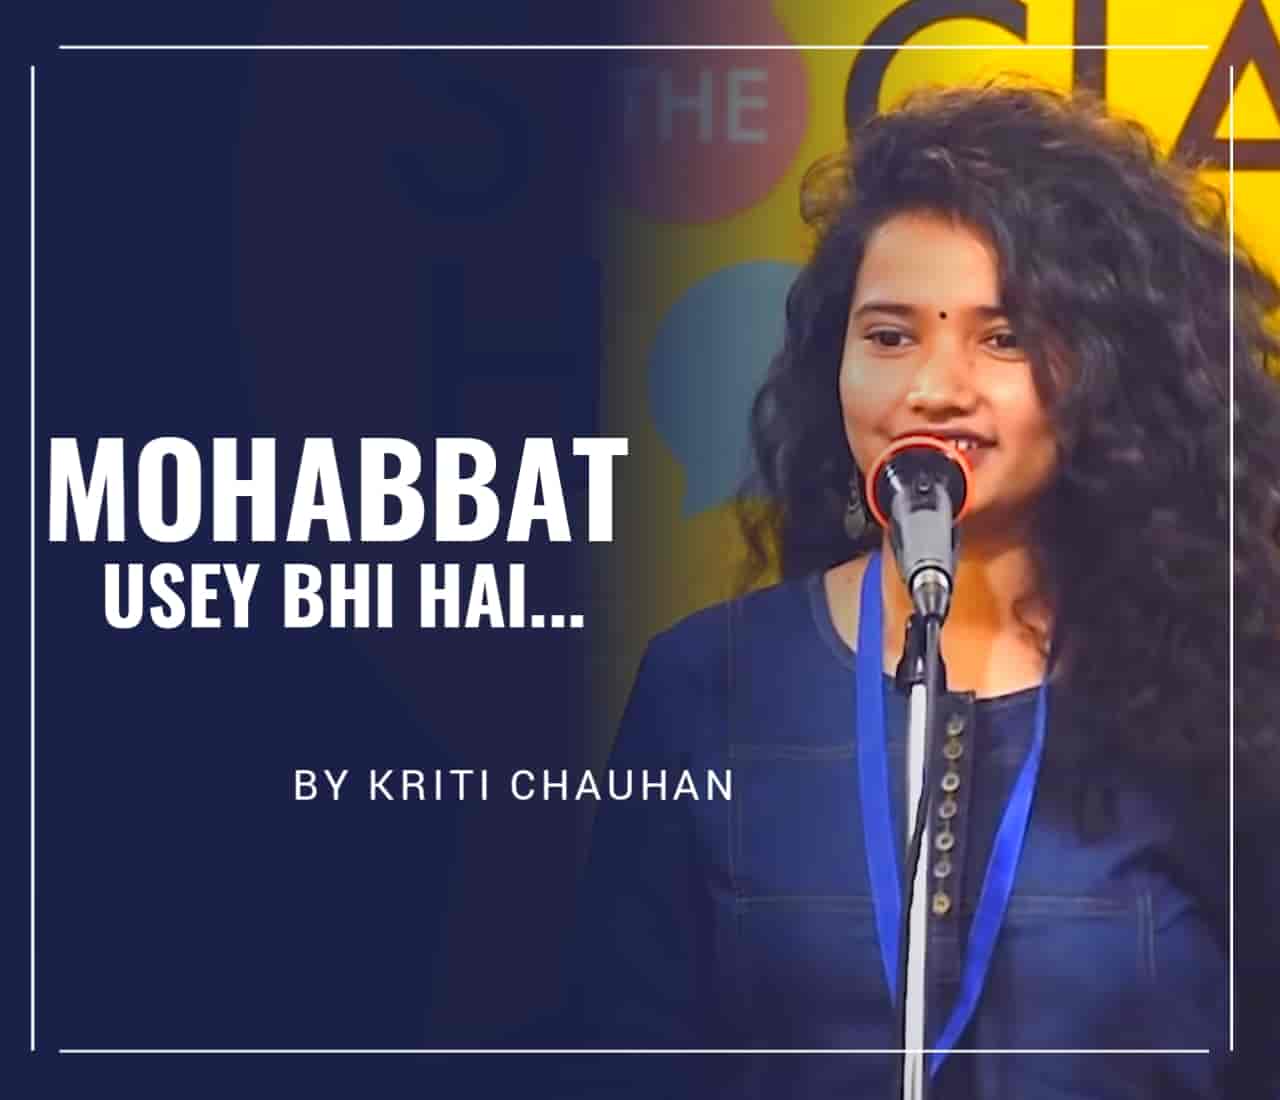 Kriti Chauhan recited a beautiful poetry Mohabbat Usey Bhi Hai House which is a beautiful and emotional poetry.